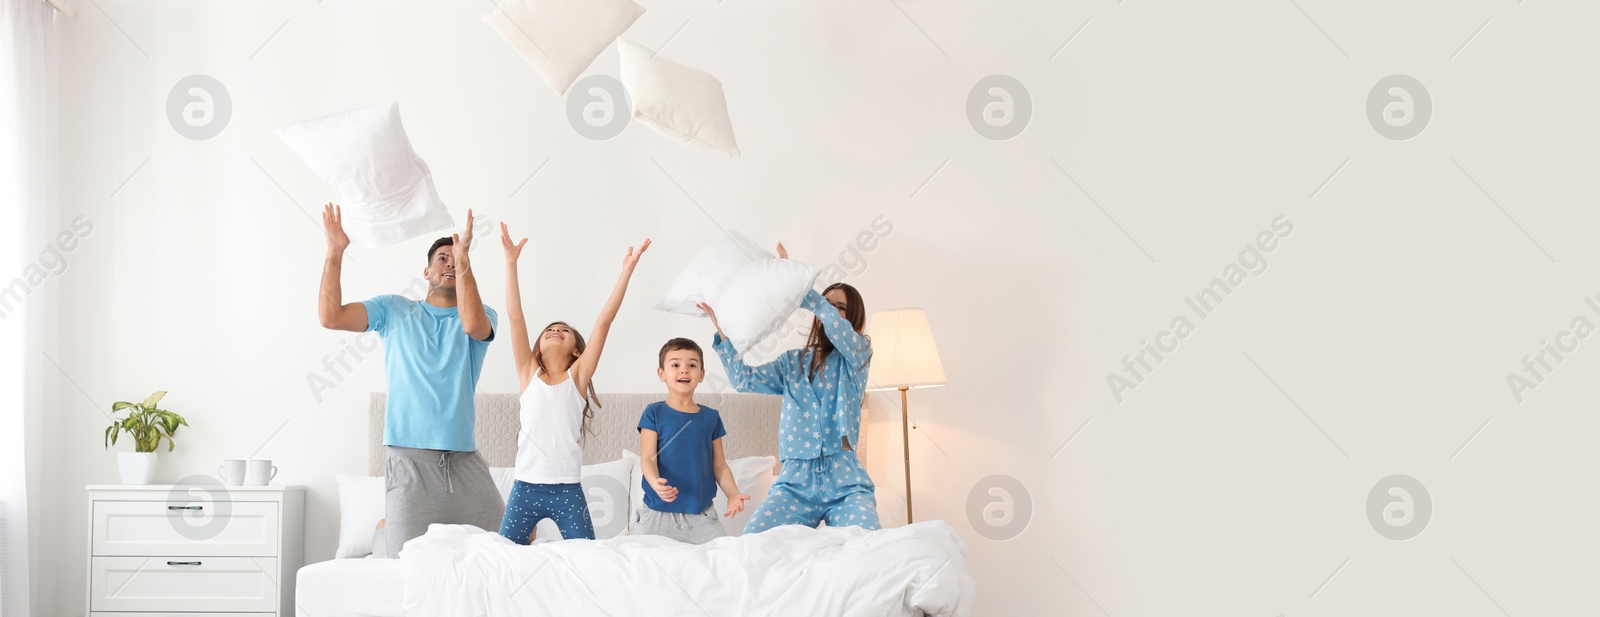 Image of Happy family playing with pillows in bedroom, space for text. Banner design